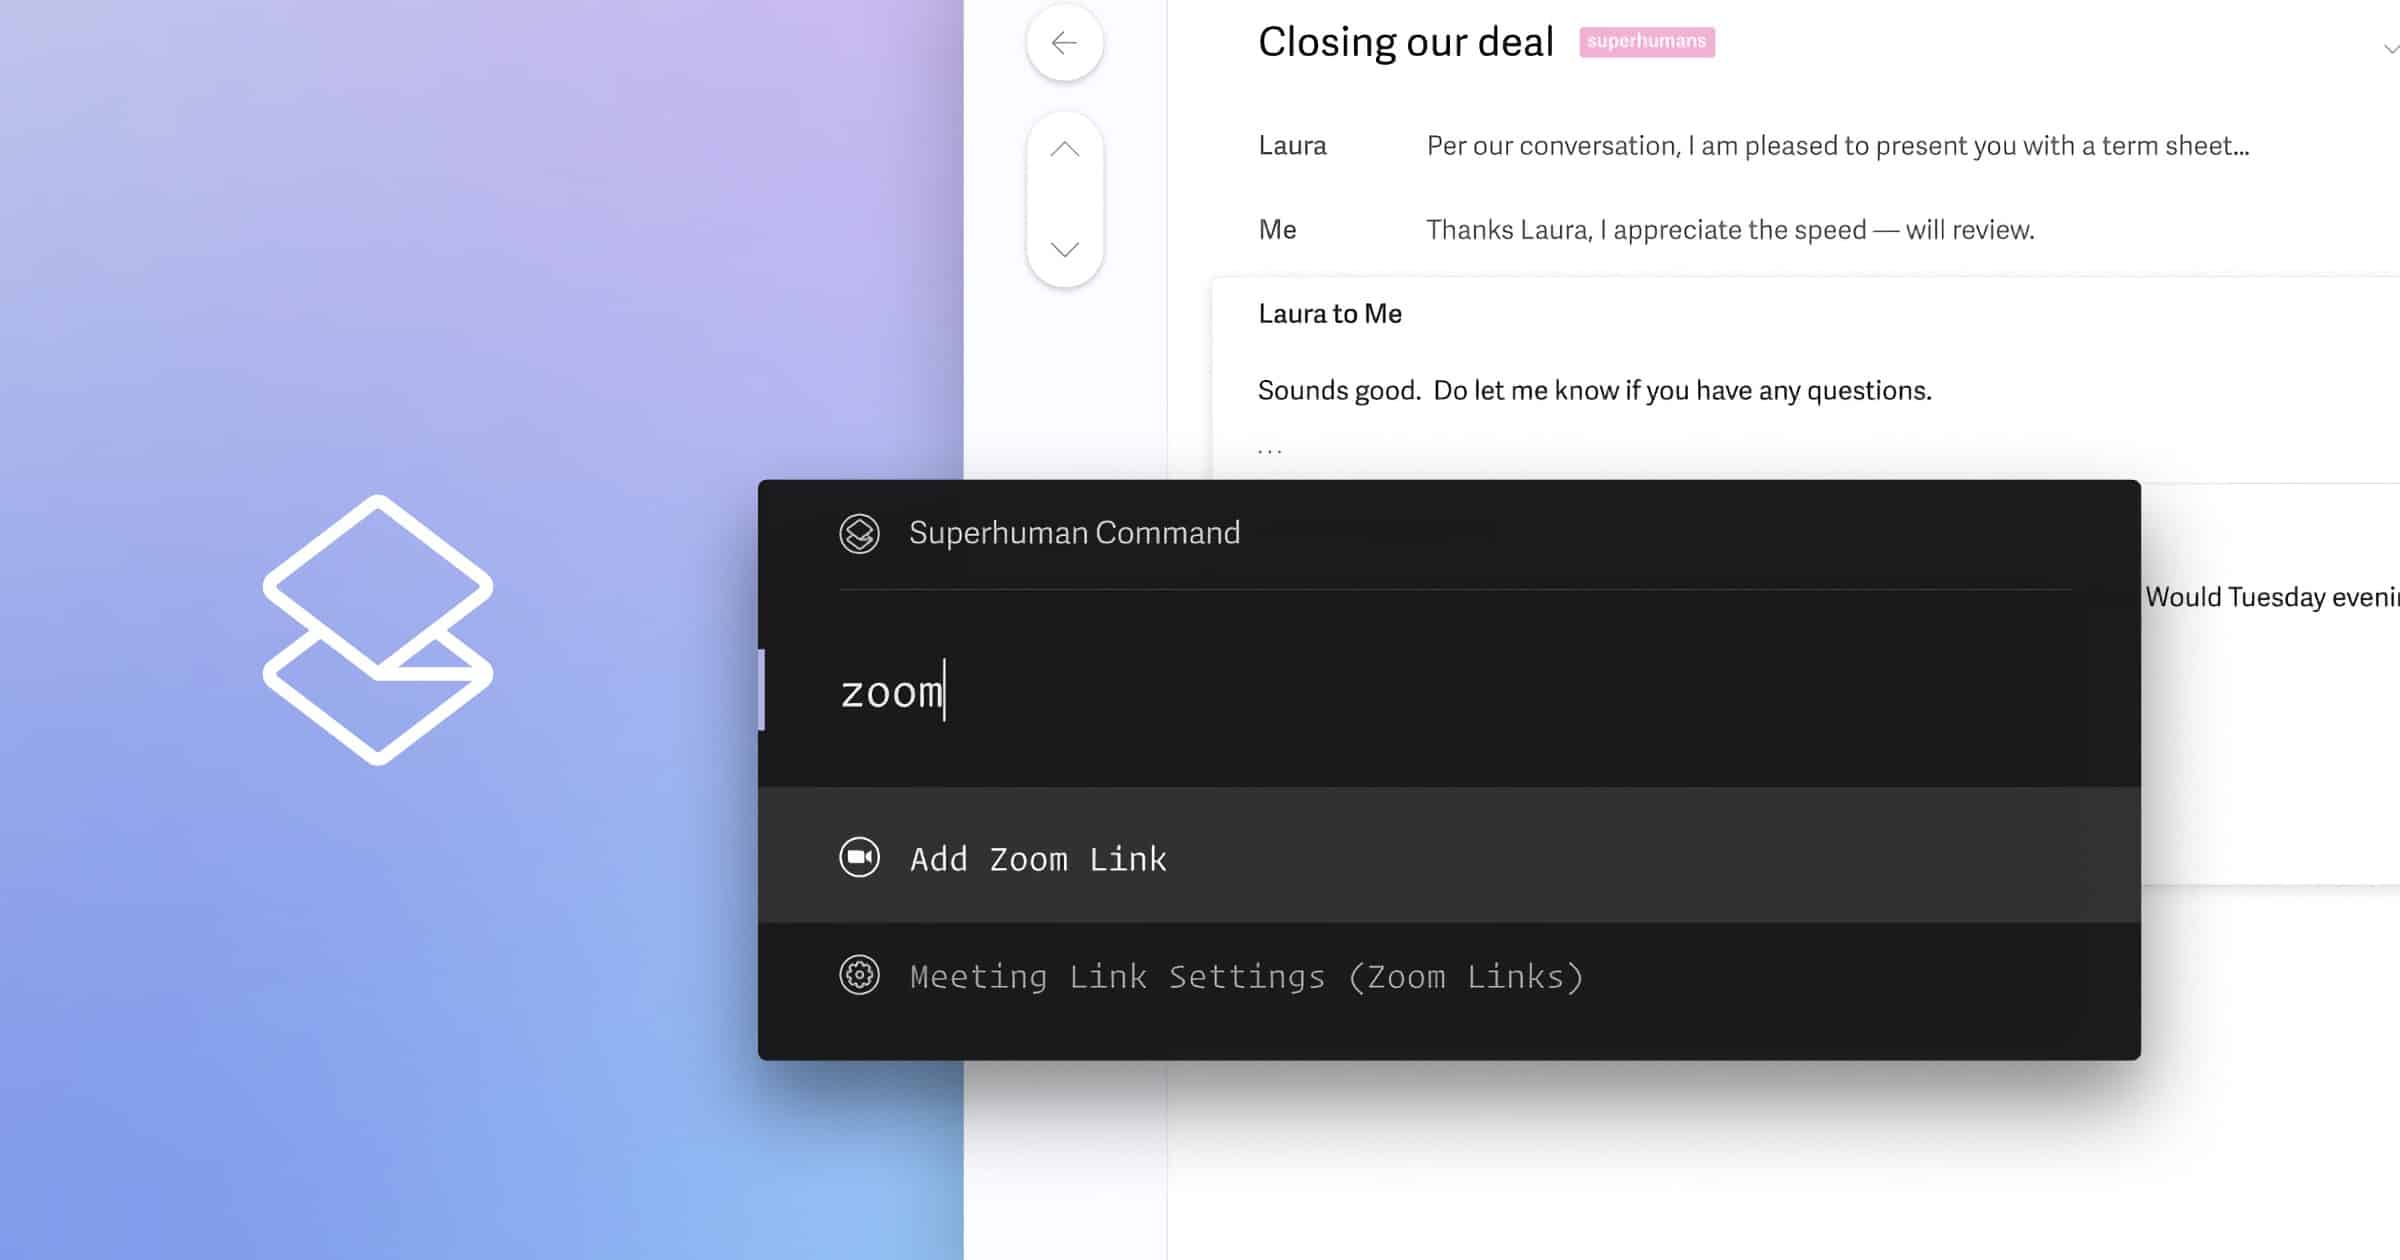 Superhuman Email Rolls Out Support for Zoom, Google Meet